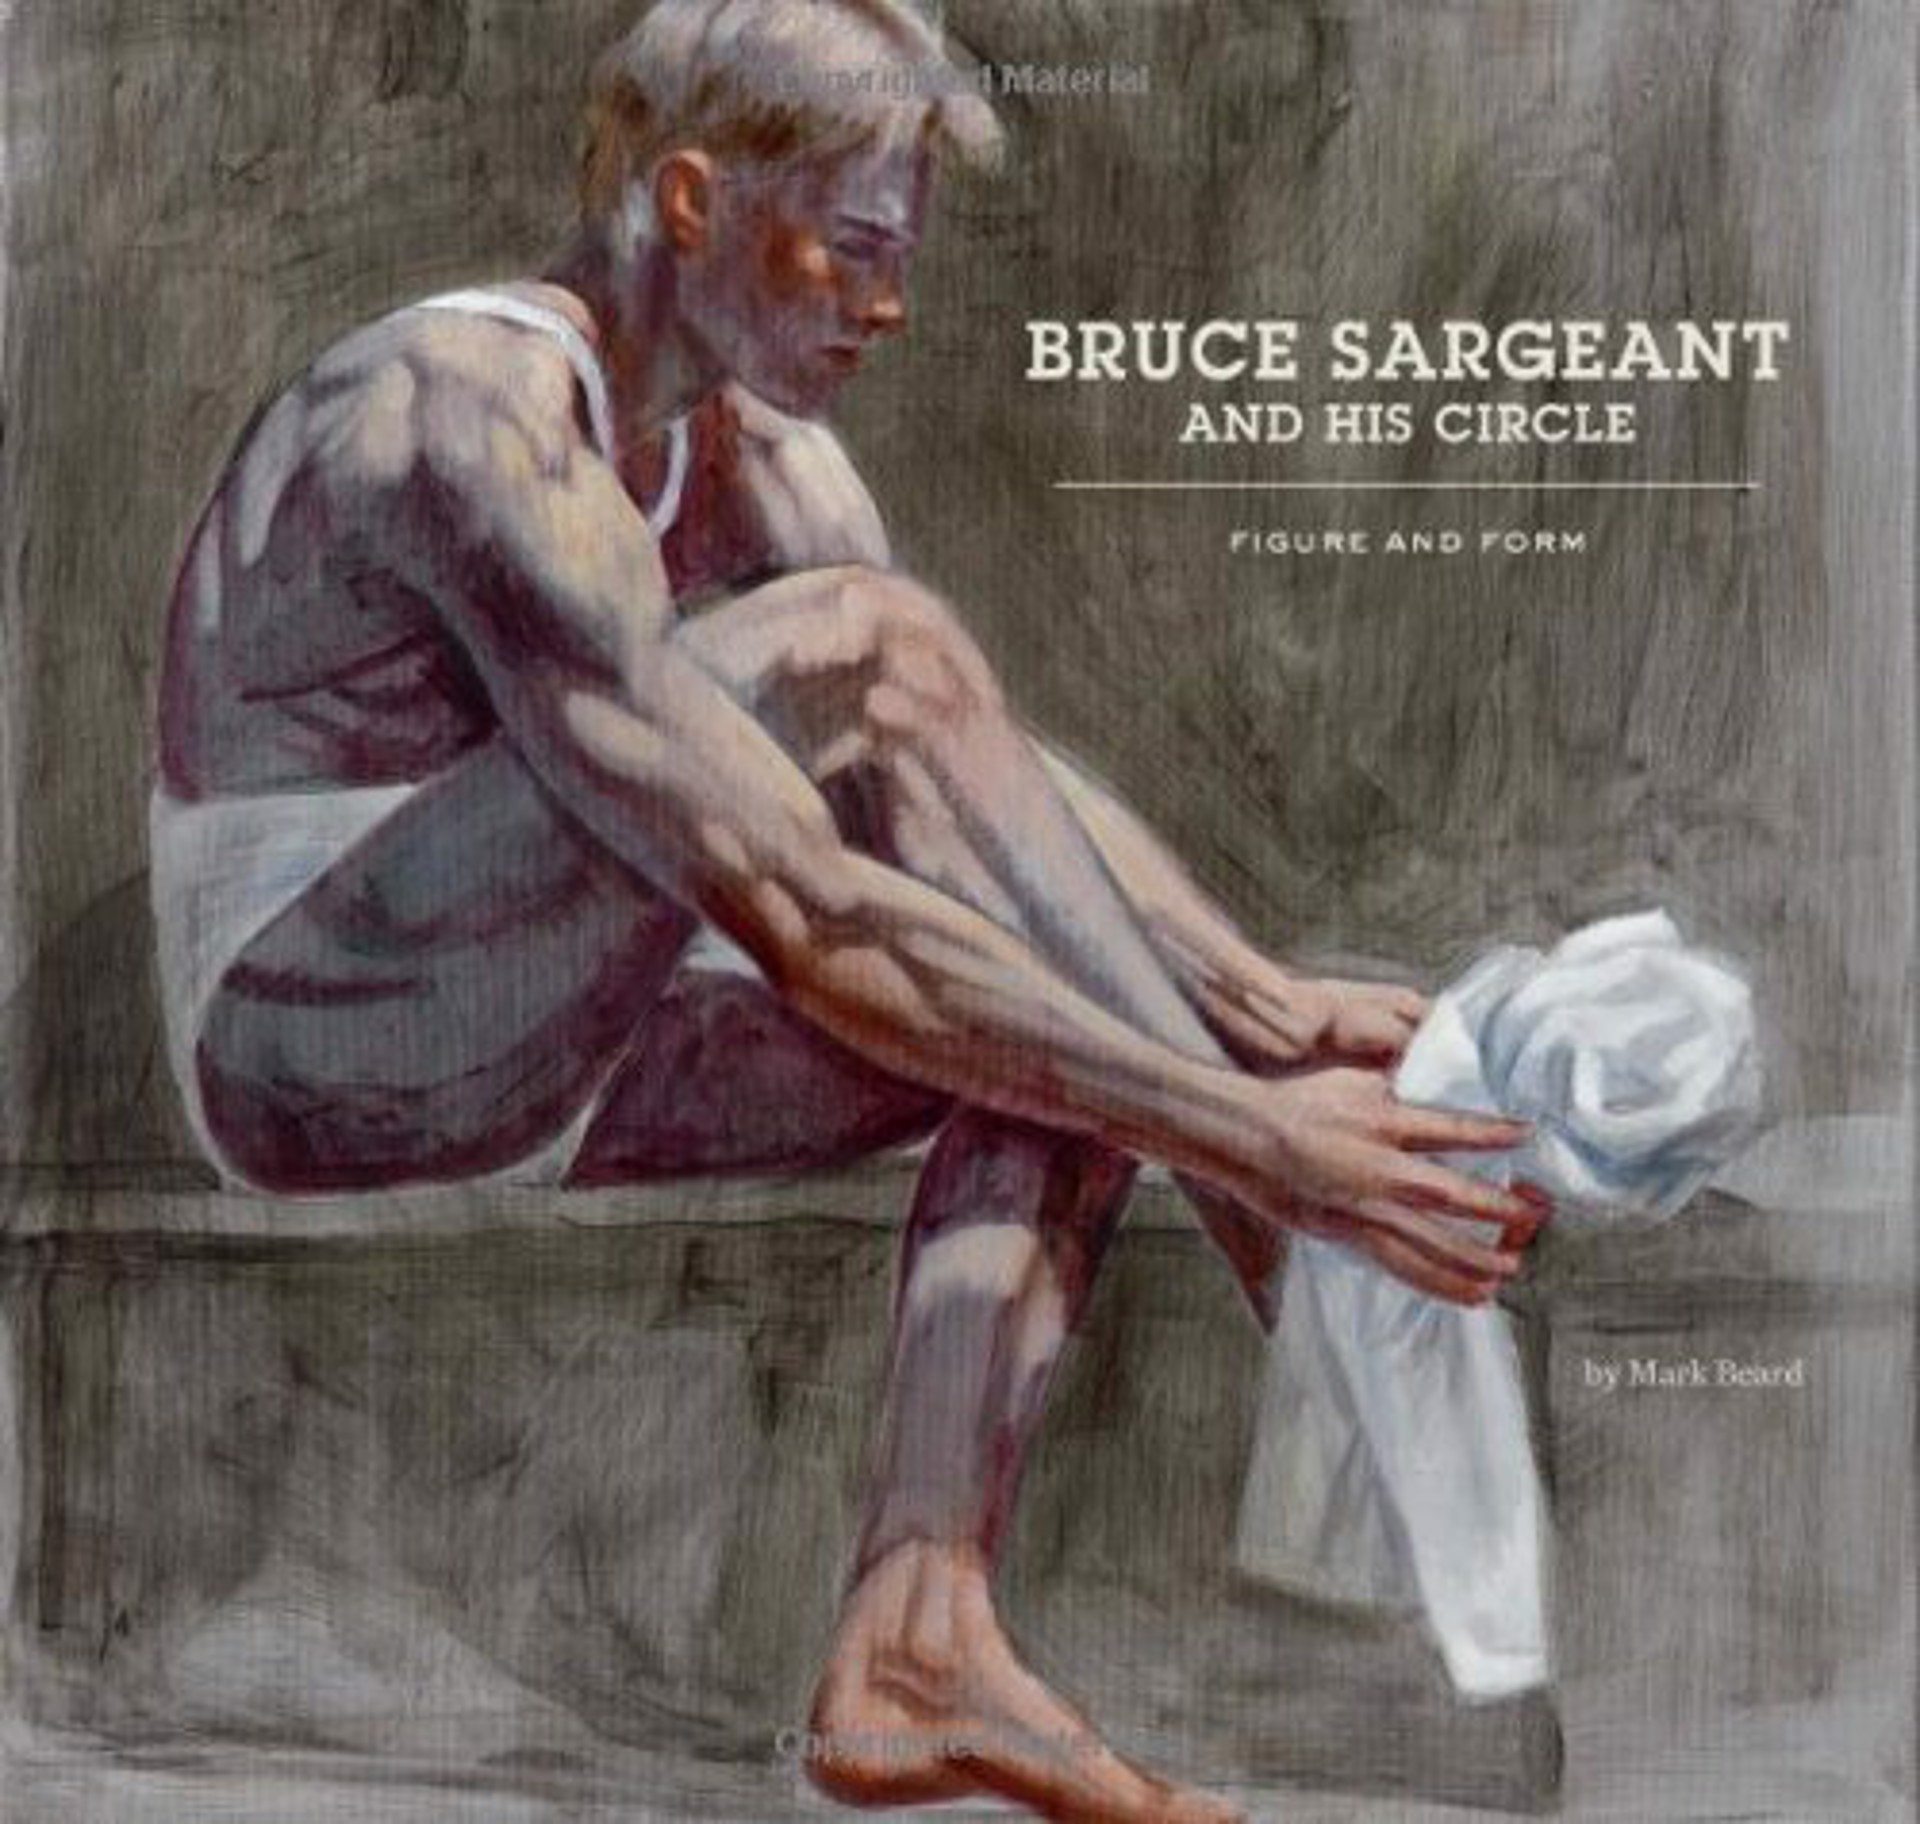 Bruce Sargeant and His Circle by Mark Beard